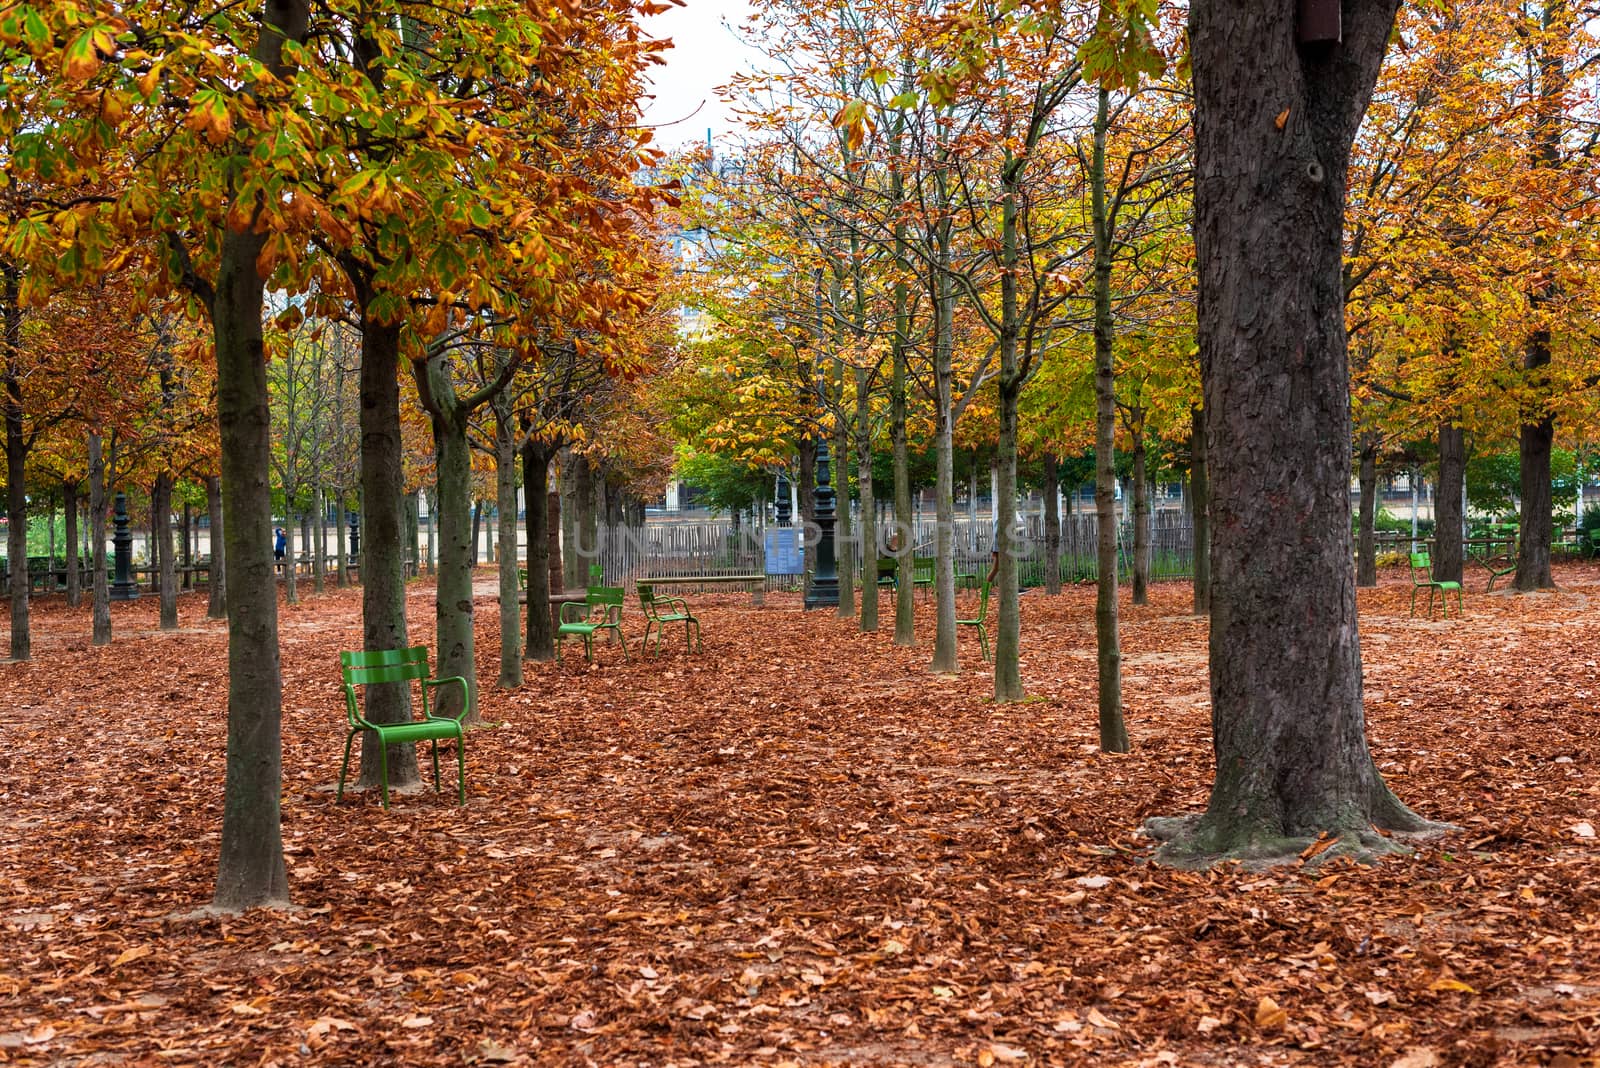 Fallen Leaves in the Tuileries Gardens by jfbenning